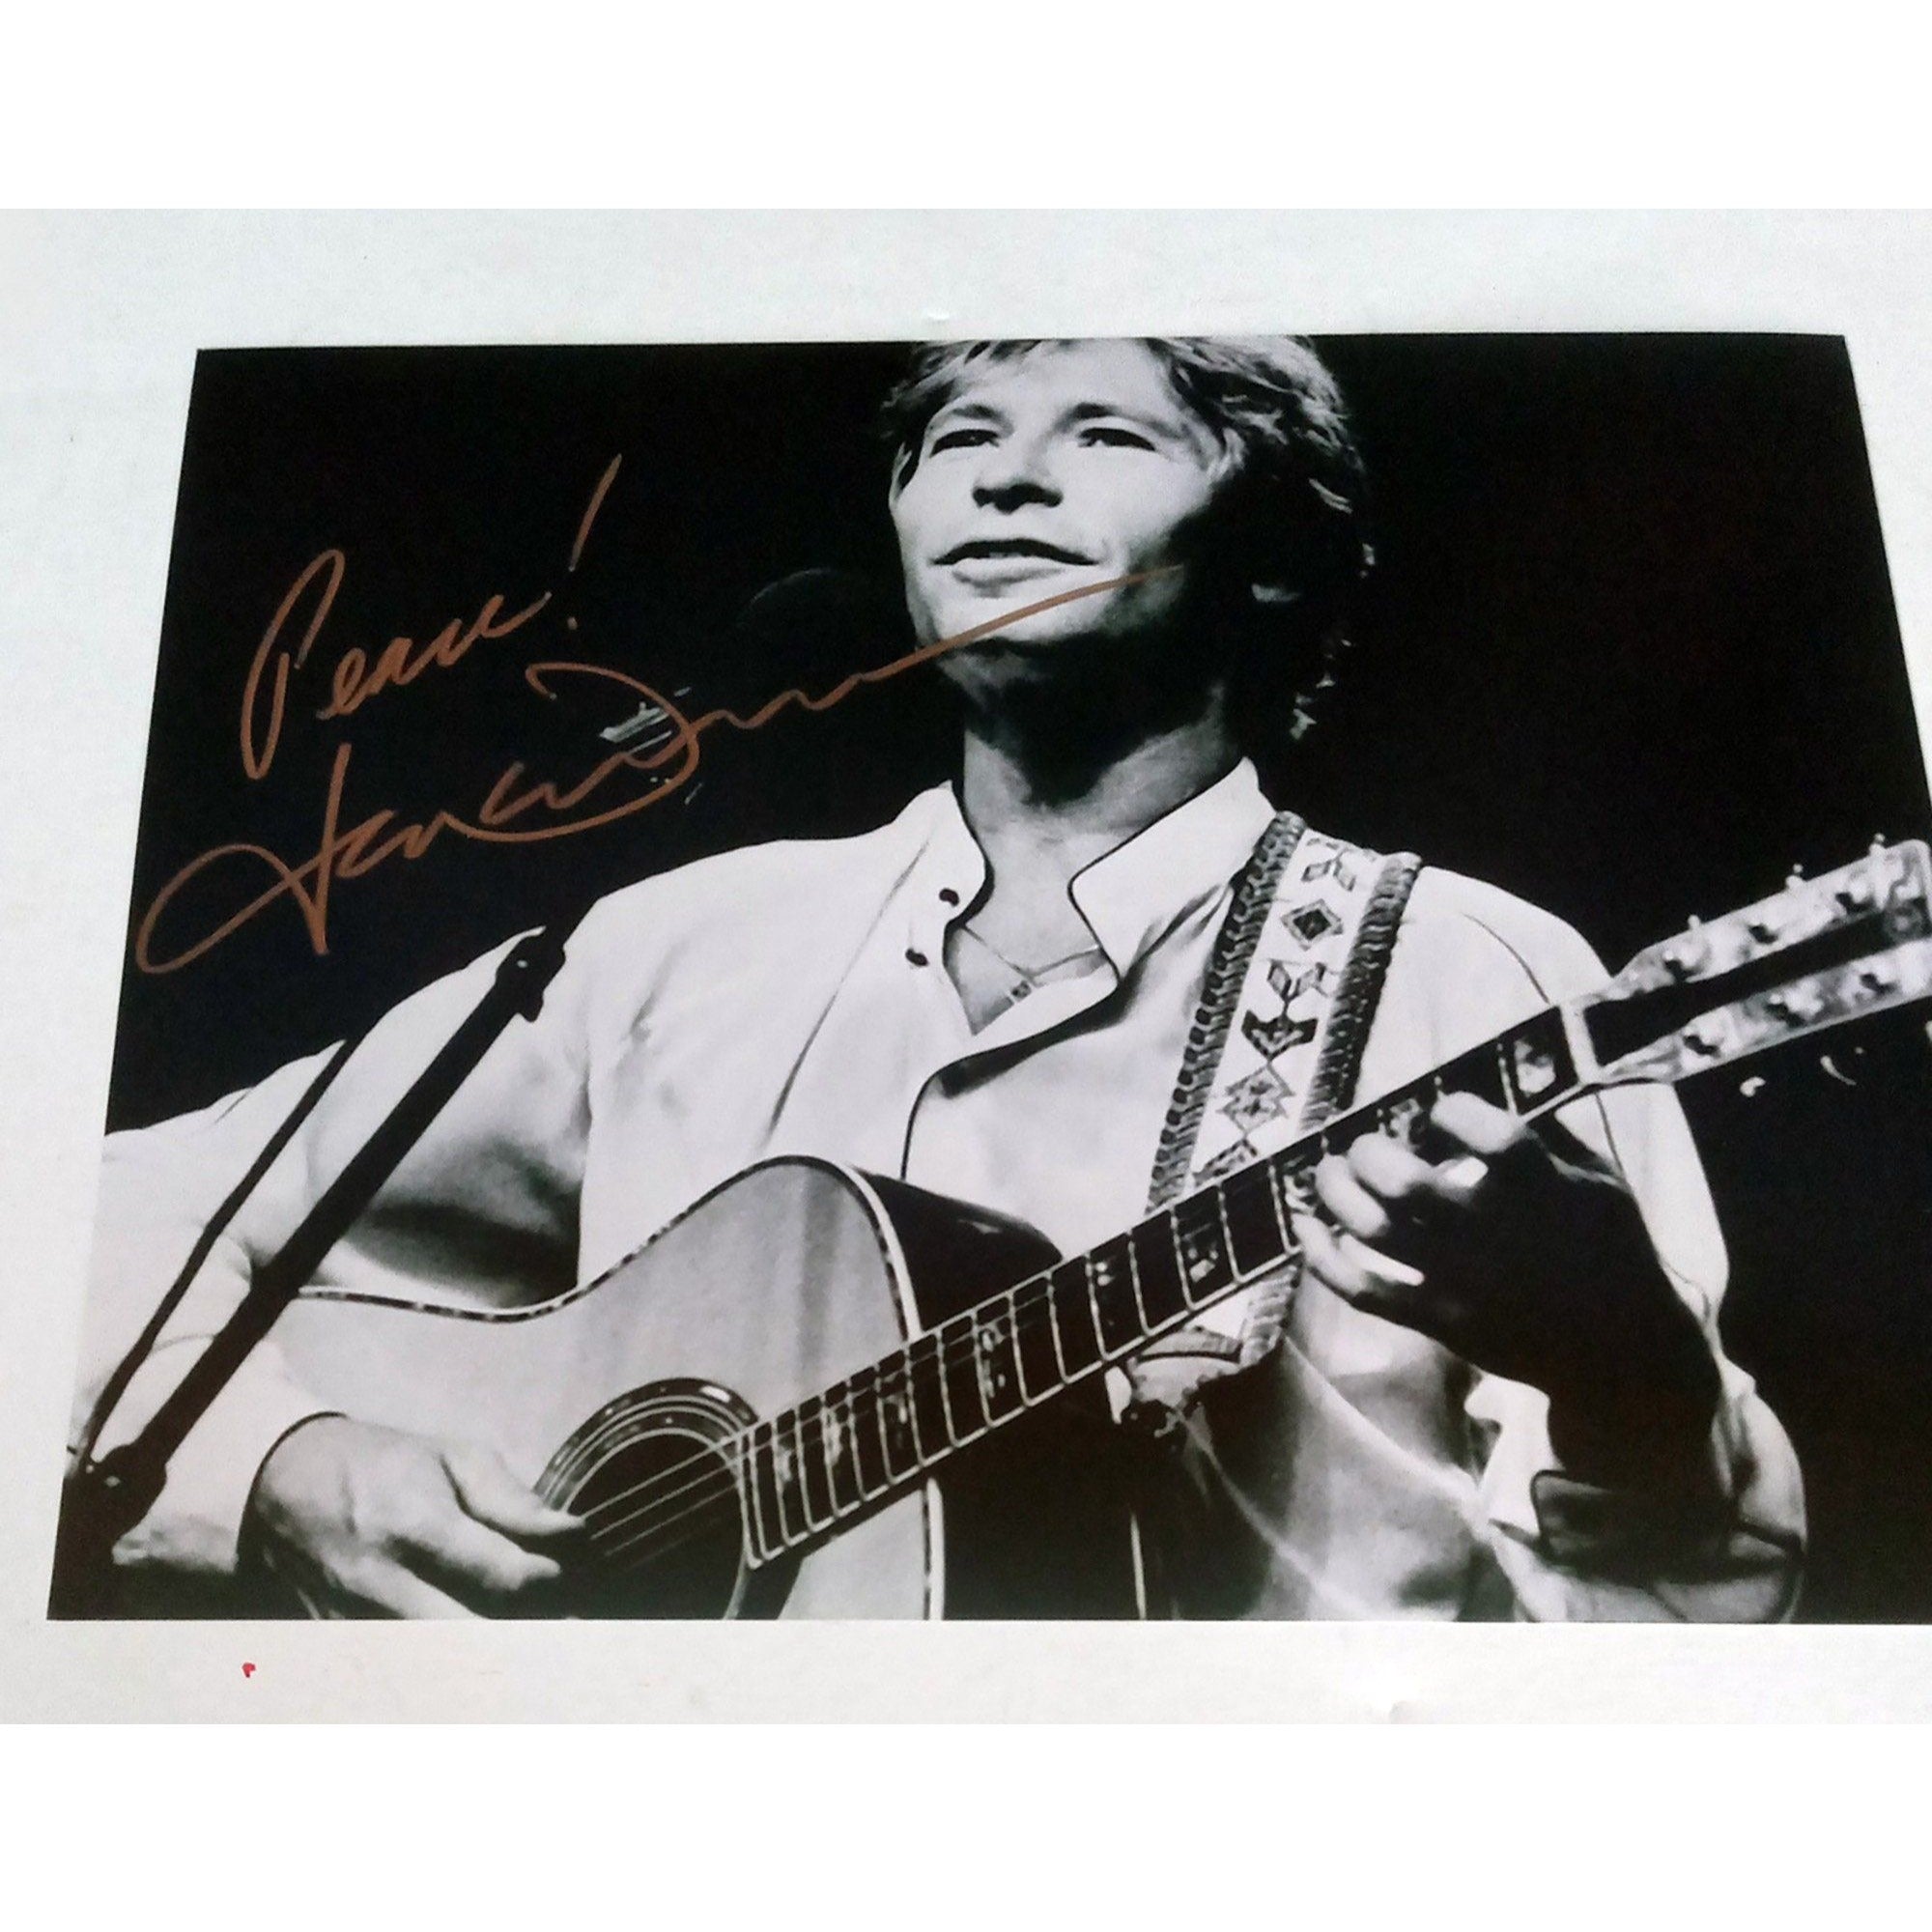 John Denver 8x10 signed photo with proof